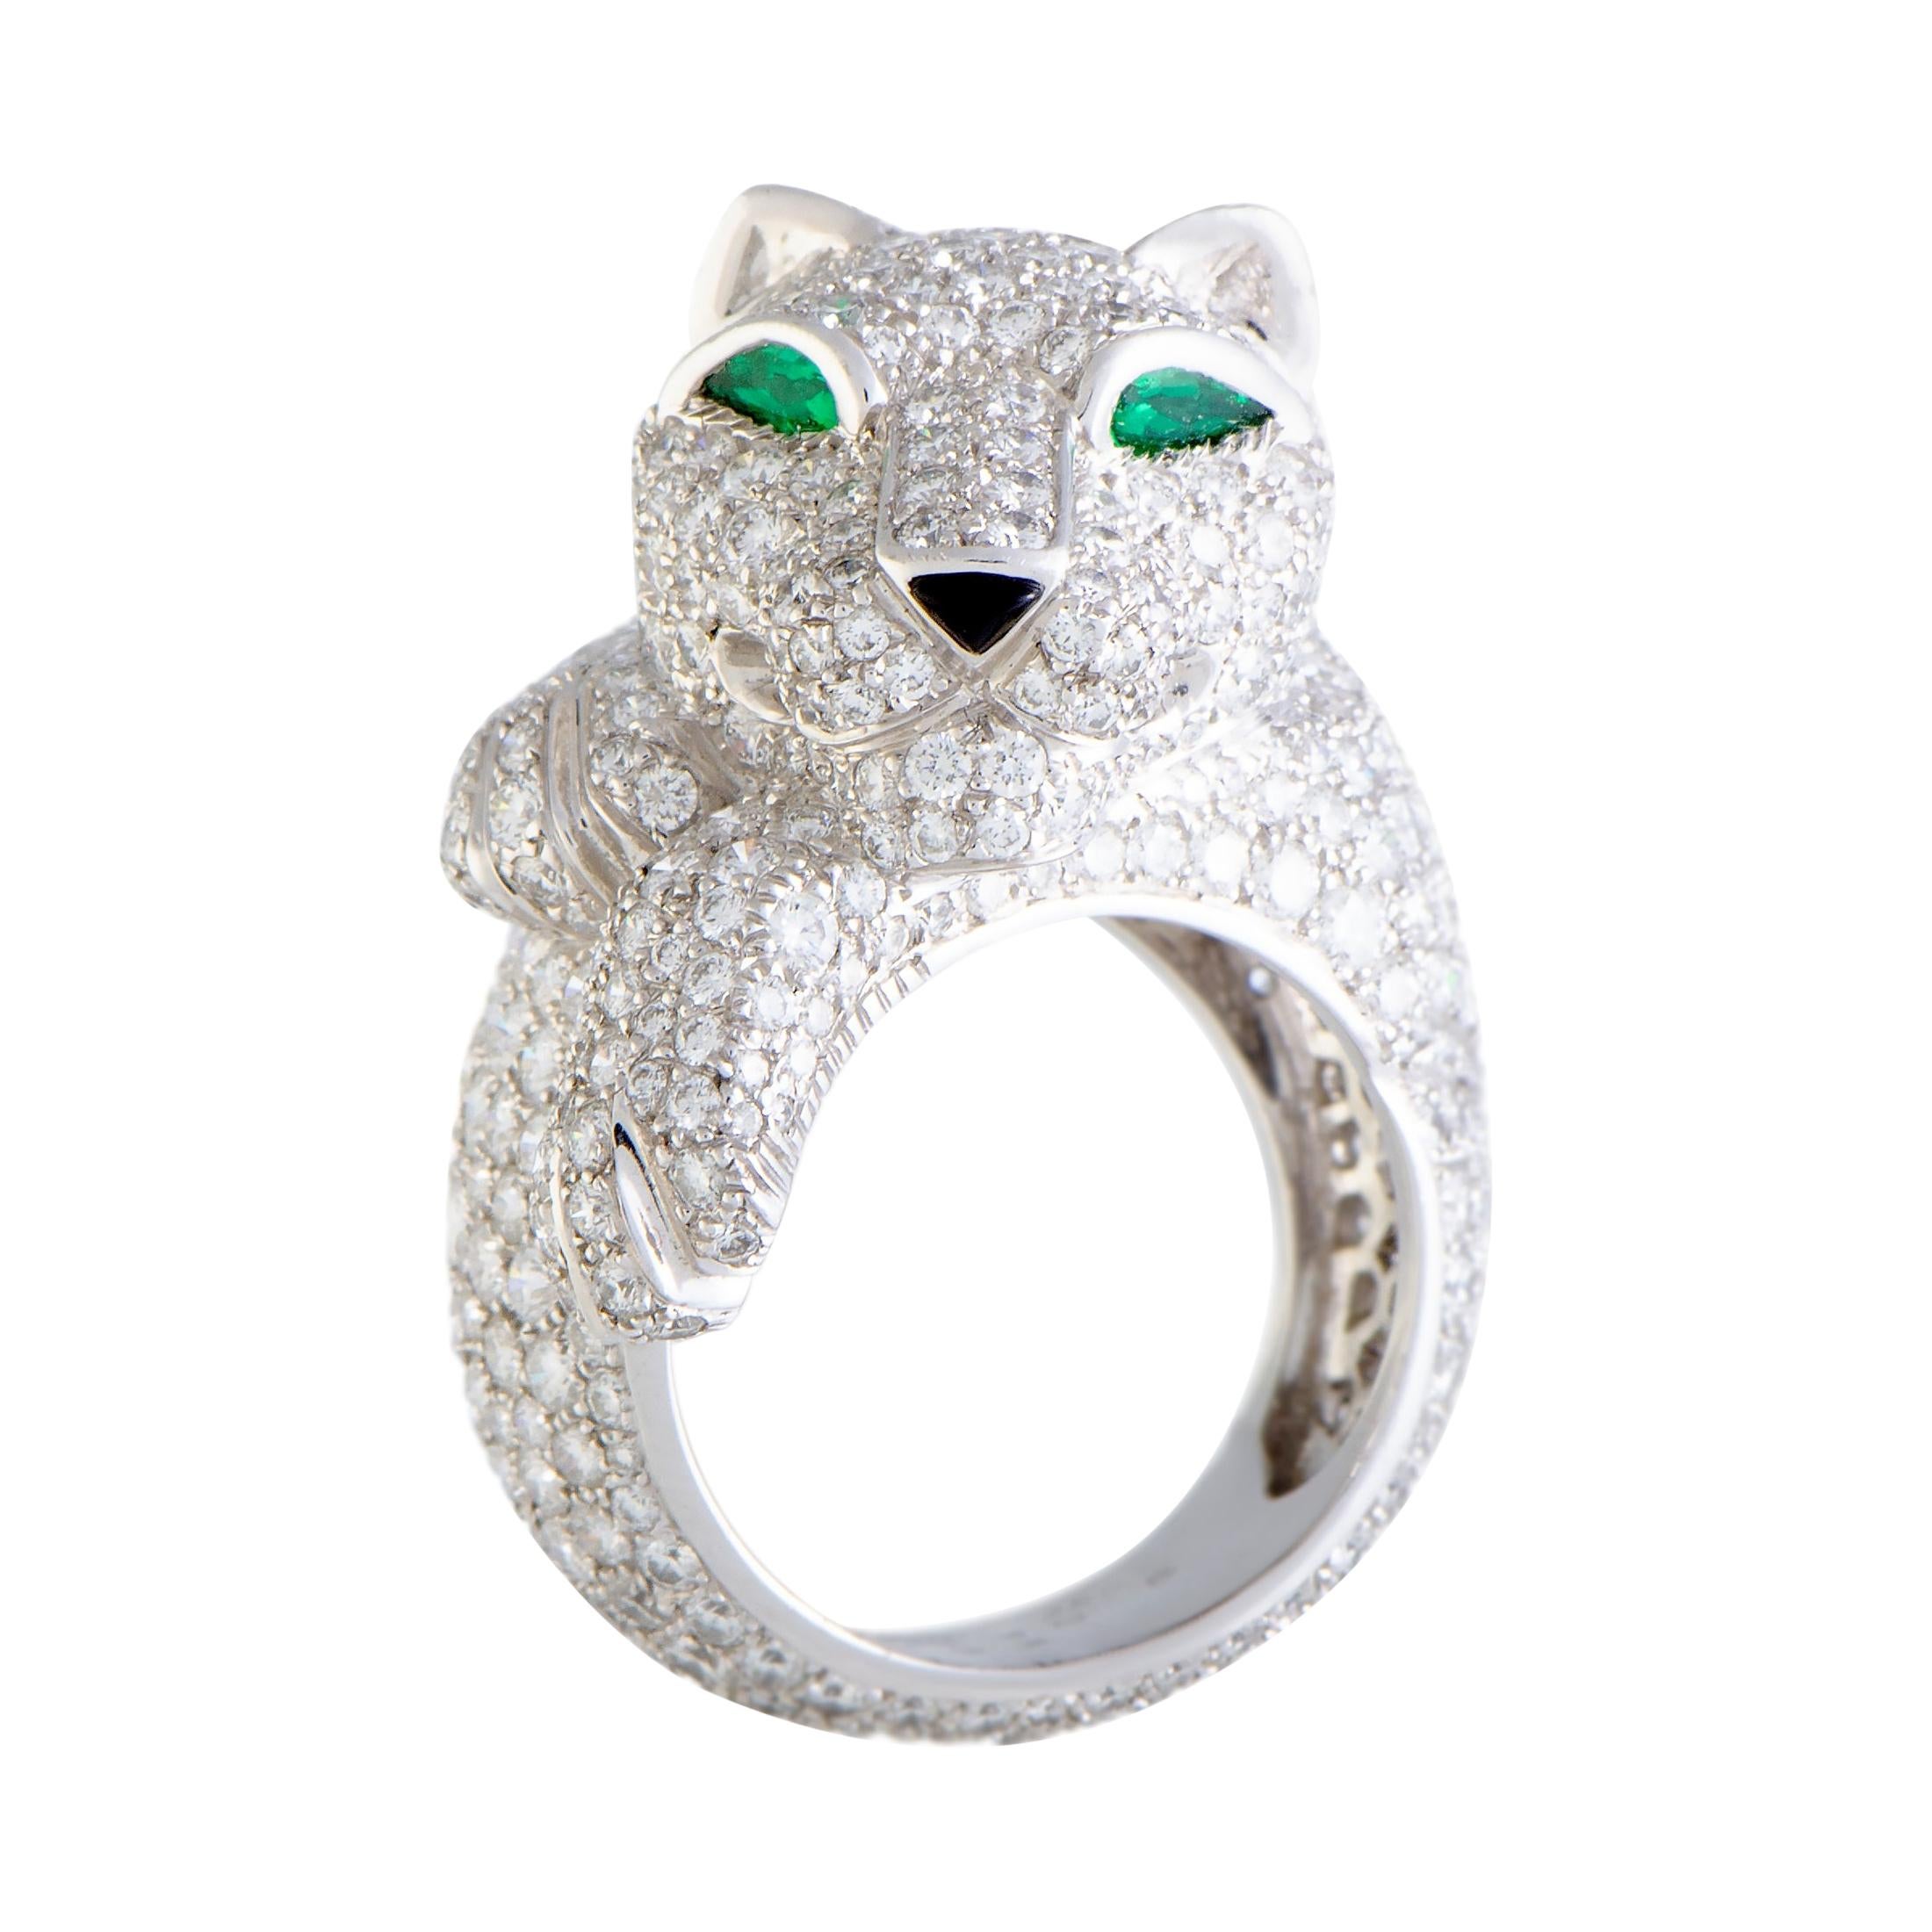 Cartier Panthere 18 Karat White Gold Full Diamond Pave Onyx and Emerald Ring